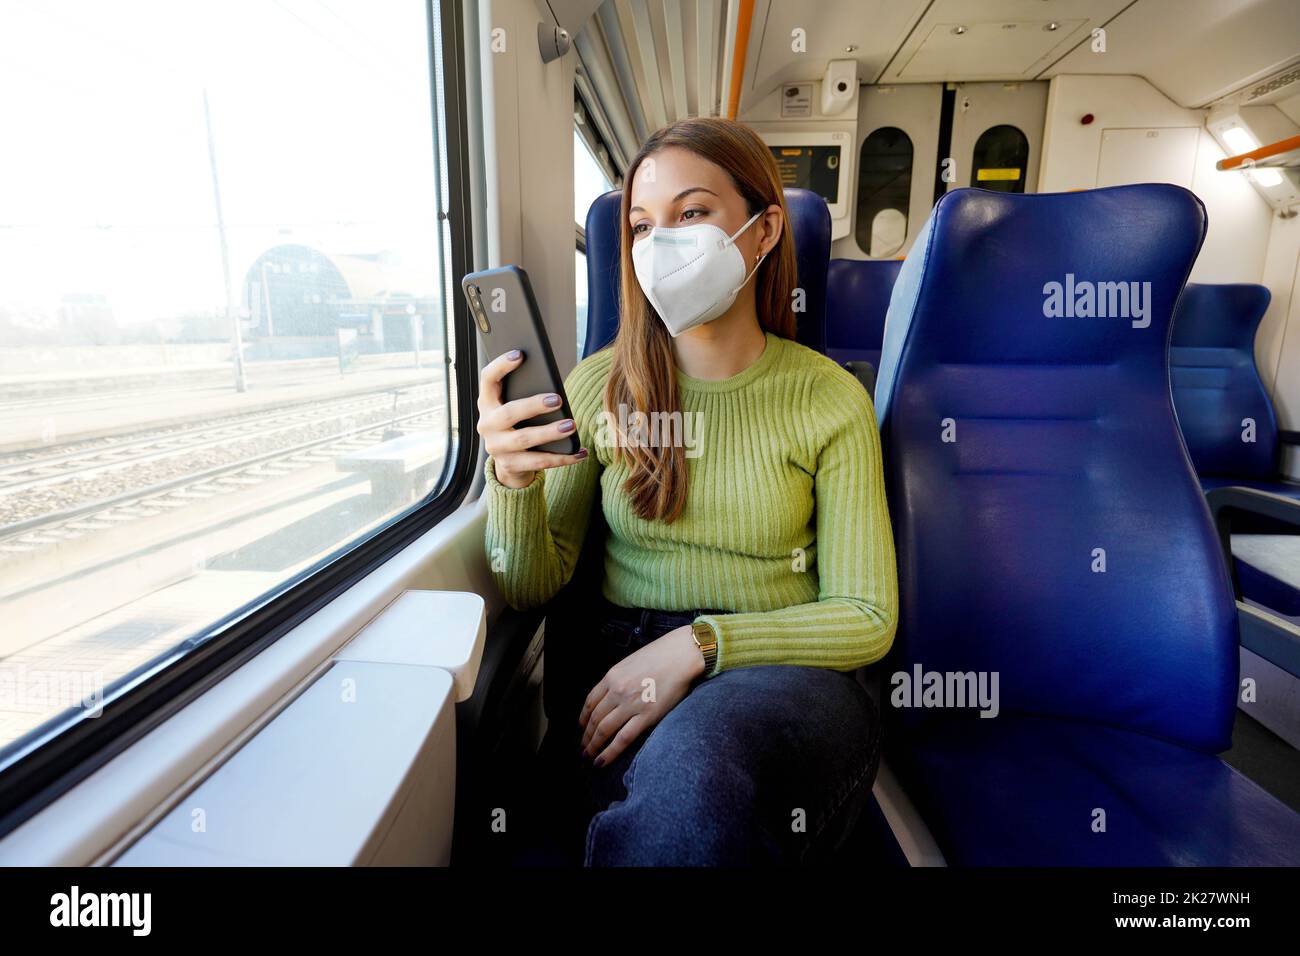 Young woman wearing medical mask relaxing in train seat while using smartphone app. Business woman enjoying view texting on mobile phone. Travel safety lifestyle. Stock Photo